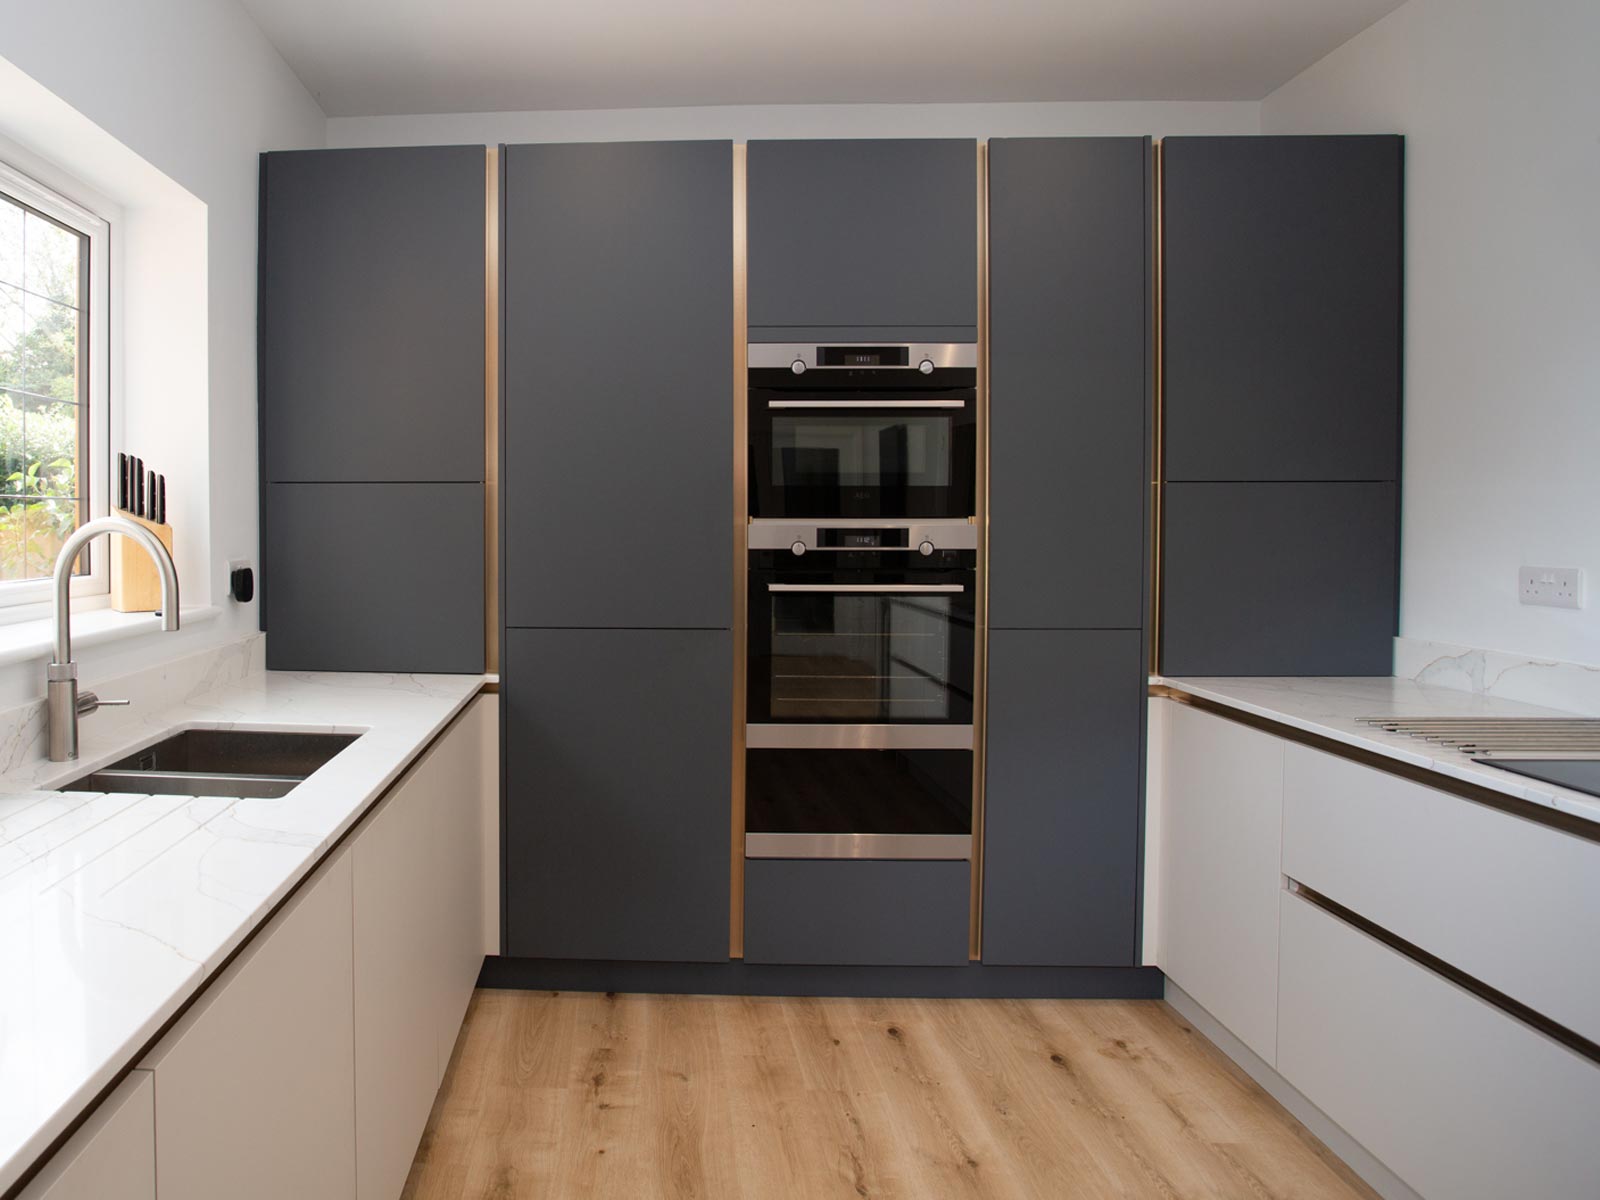 A matt cashmere kitchen with pale grey and onyx cabinet doors